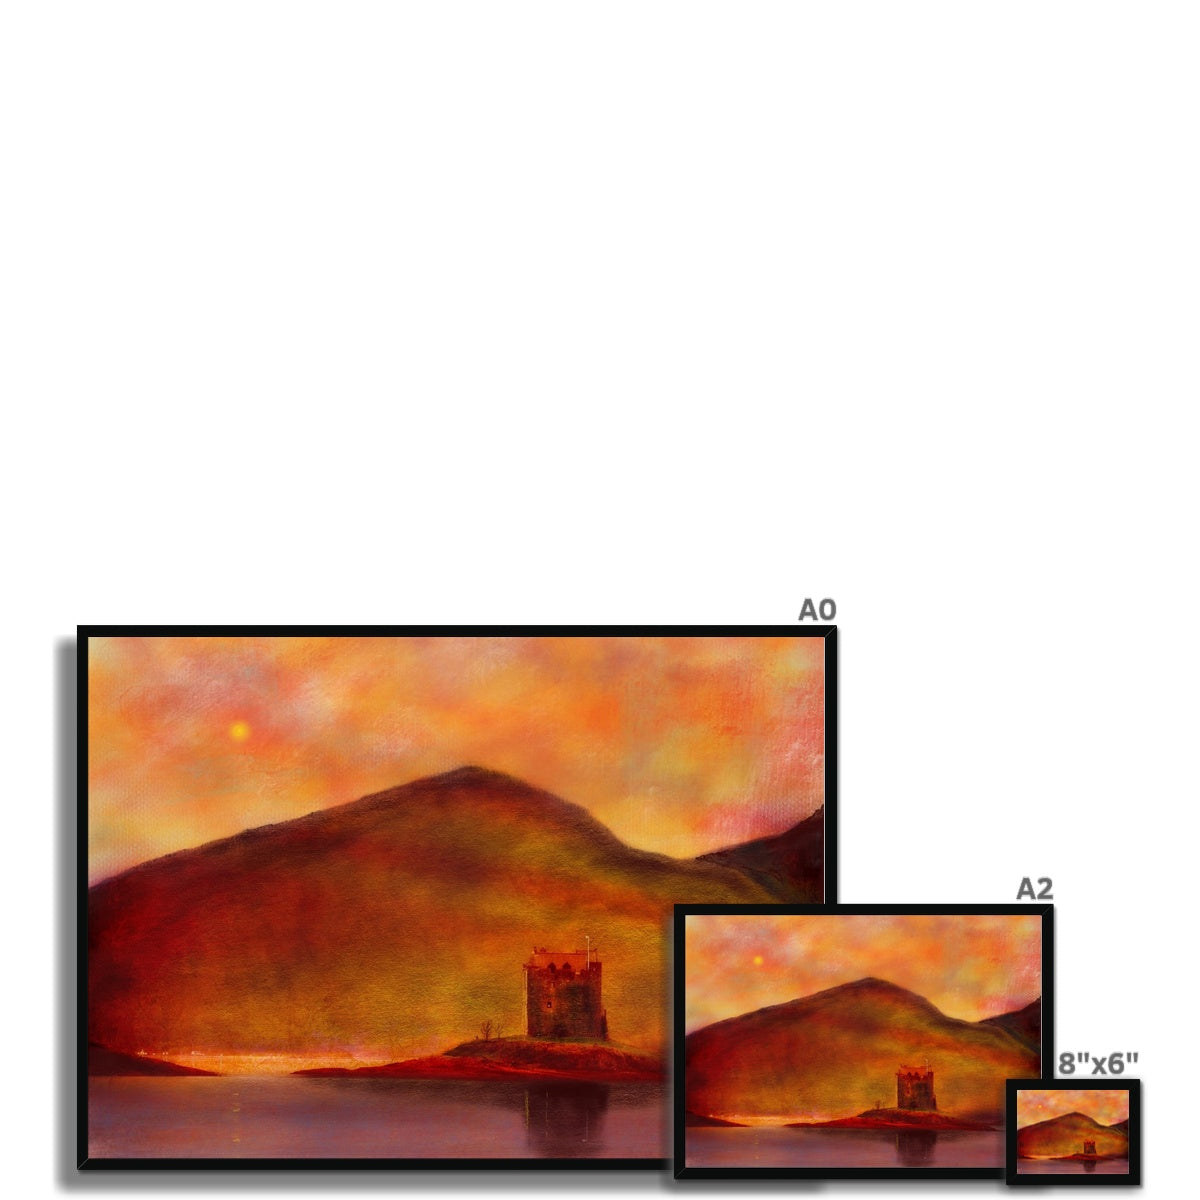 Castle Stalker Sunset Painting | Framed Prints From Scotland-Framed Prints-Historic & Iconic Scotland Art Gallery-Paintings, Prints, Homeware, Art Gifts From Scotland By Scottish Artist Kevin Hunter